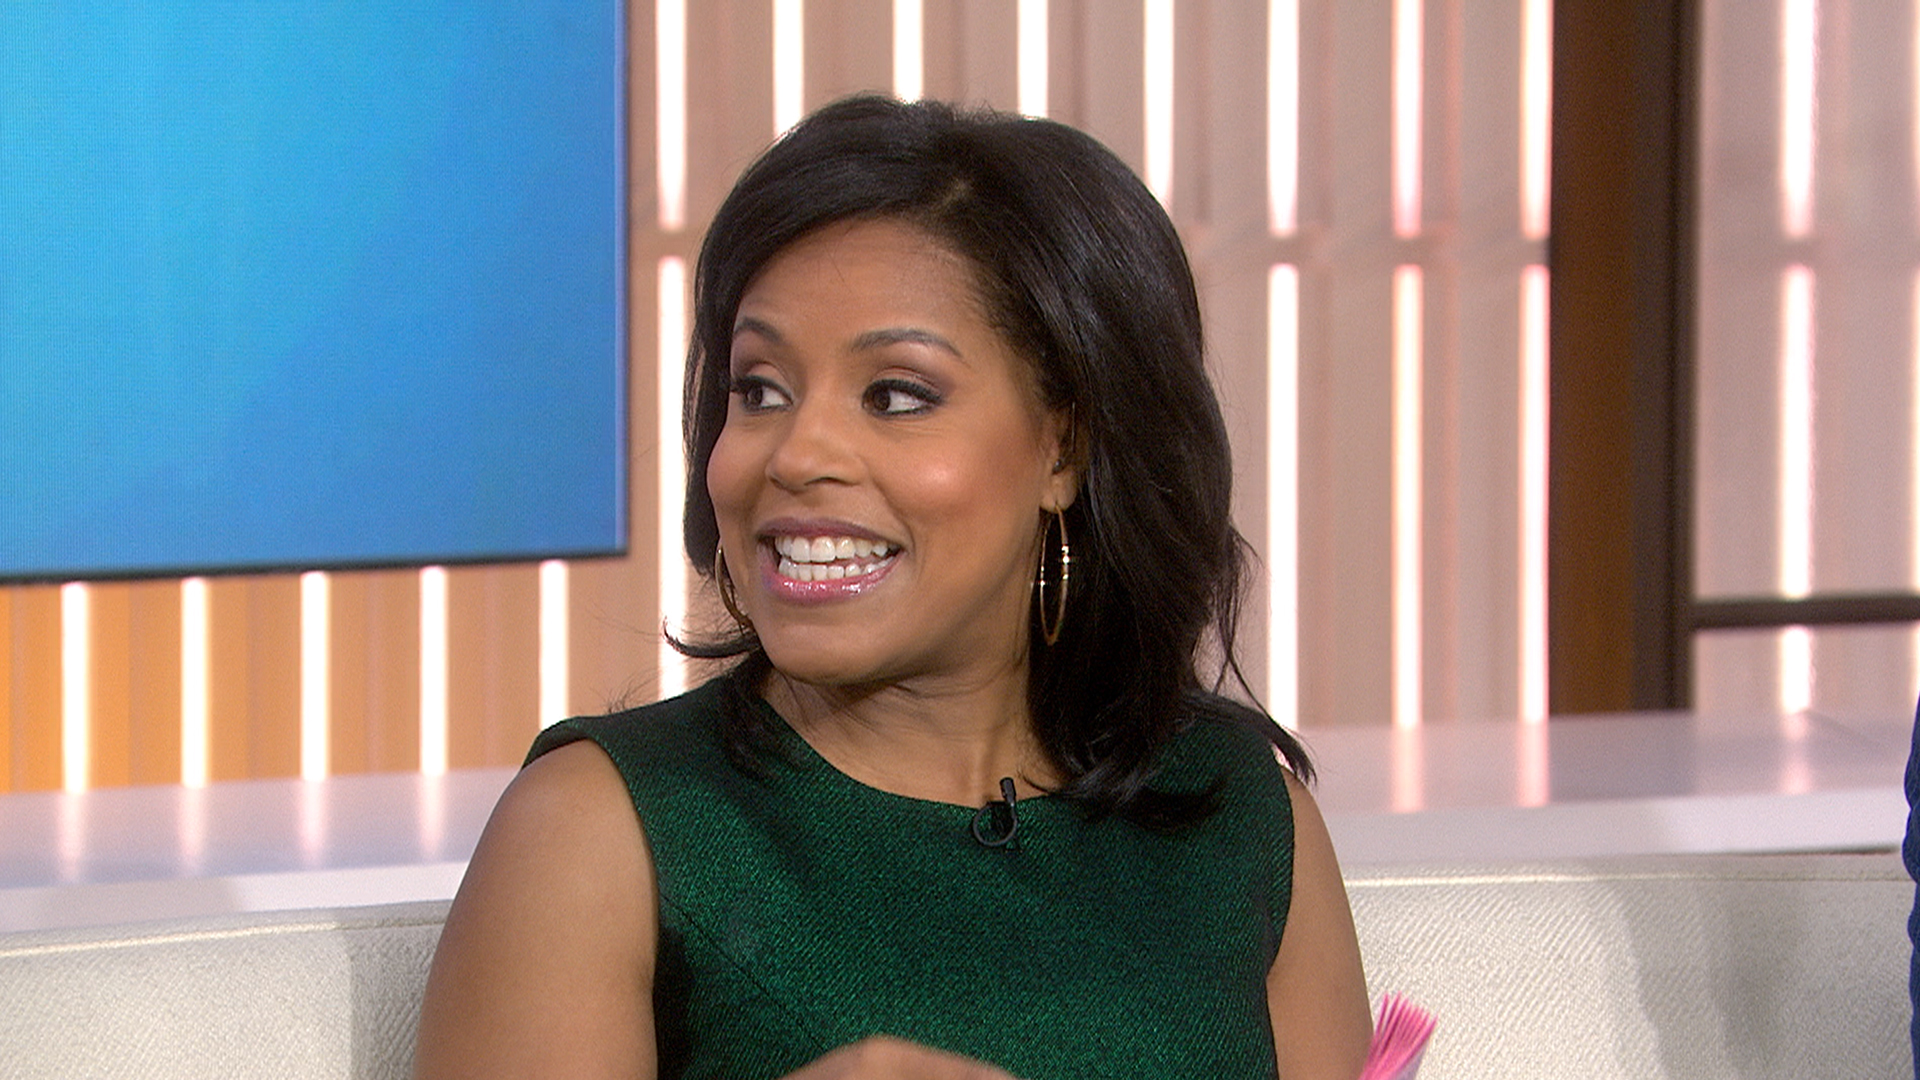 Sheinelle Jones speaks out about vocal cord polyp after health scare.